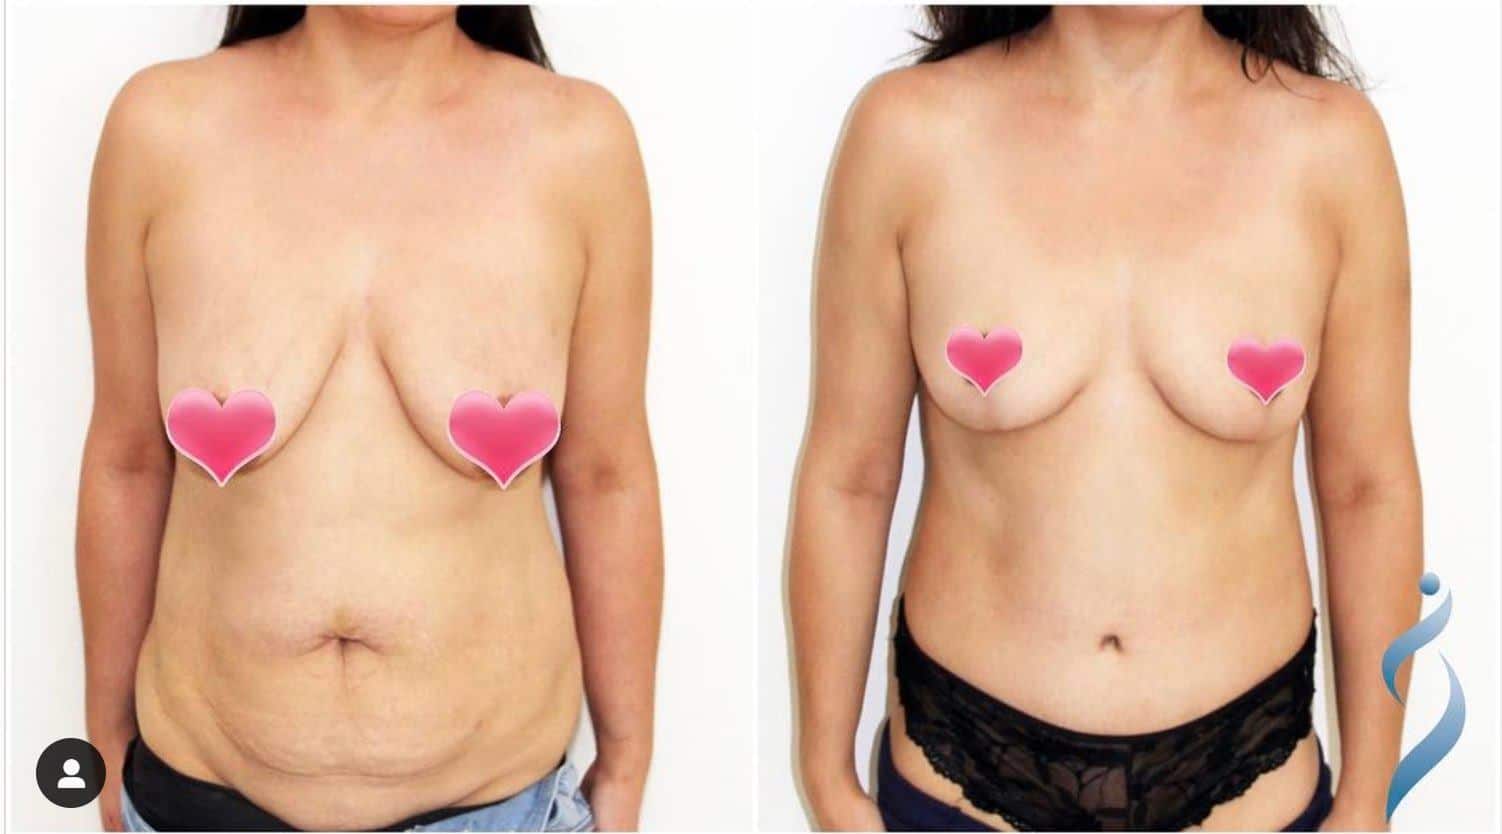 How Much Does a Tummy Tuck Cost?, Plymouth Meeting Tummy Tuck